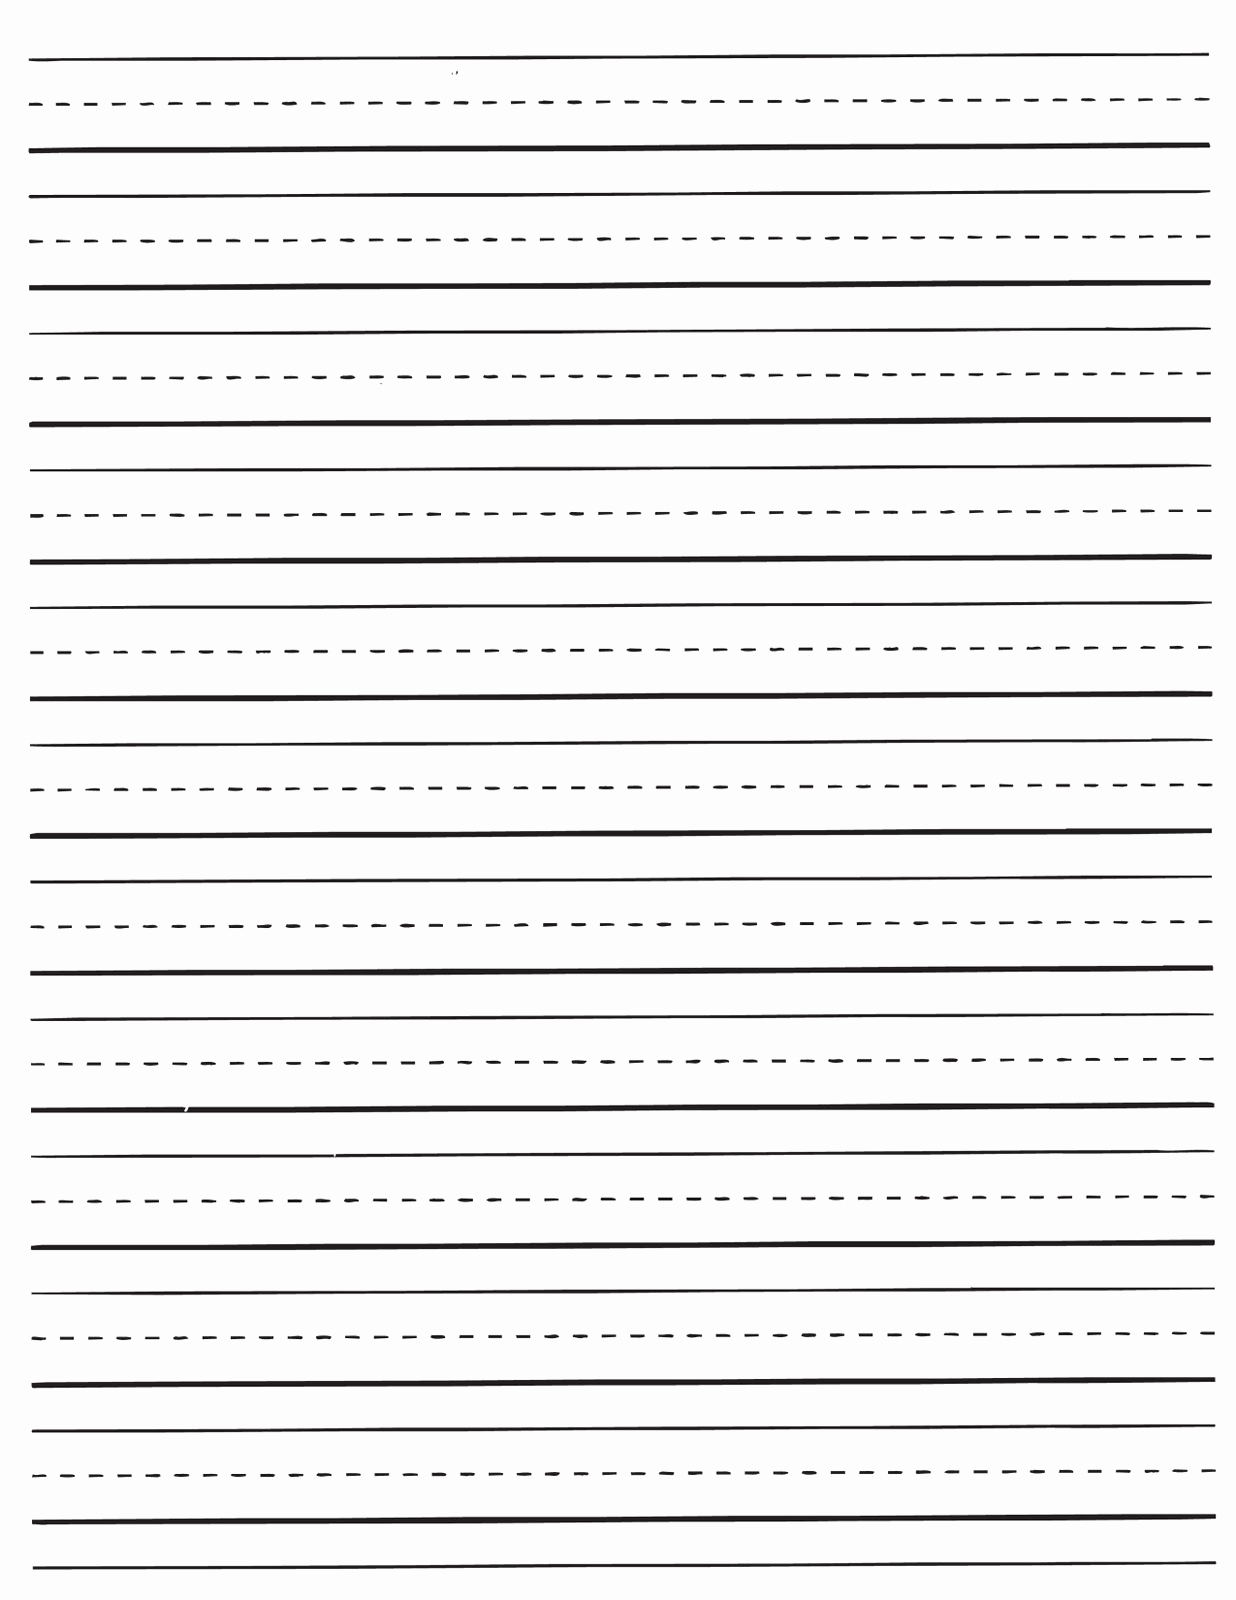 Free Printable Lined Paper Beautiful Free Printable Lined Handwriting Paper Printable Pages